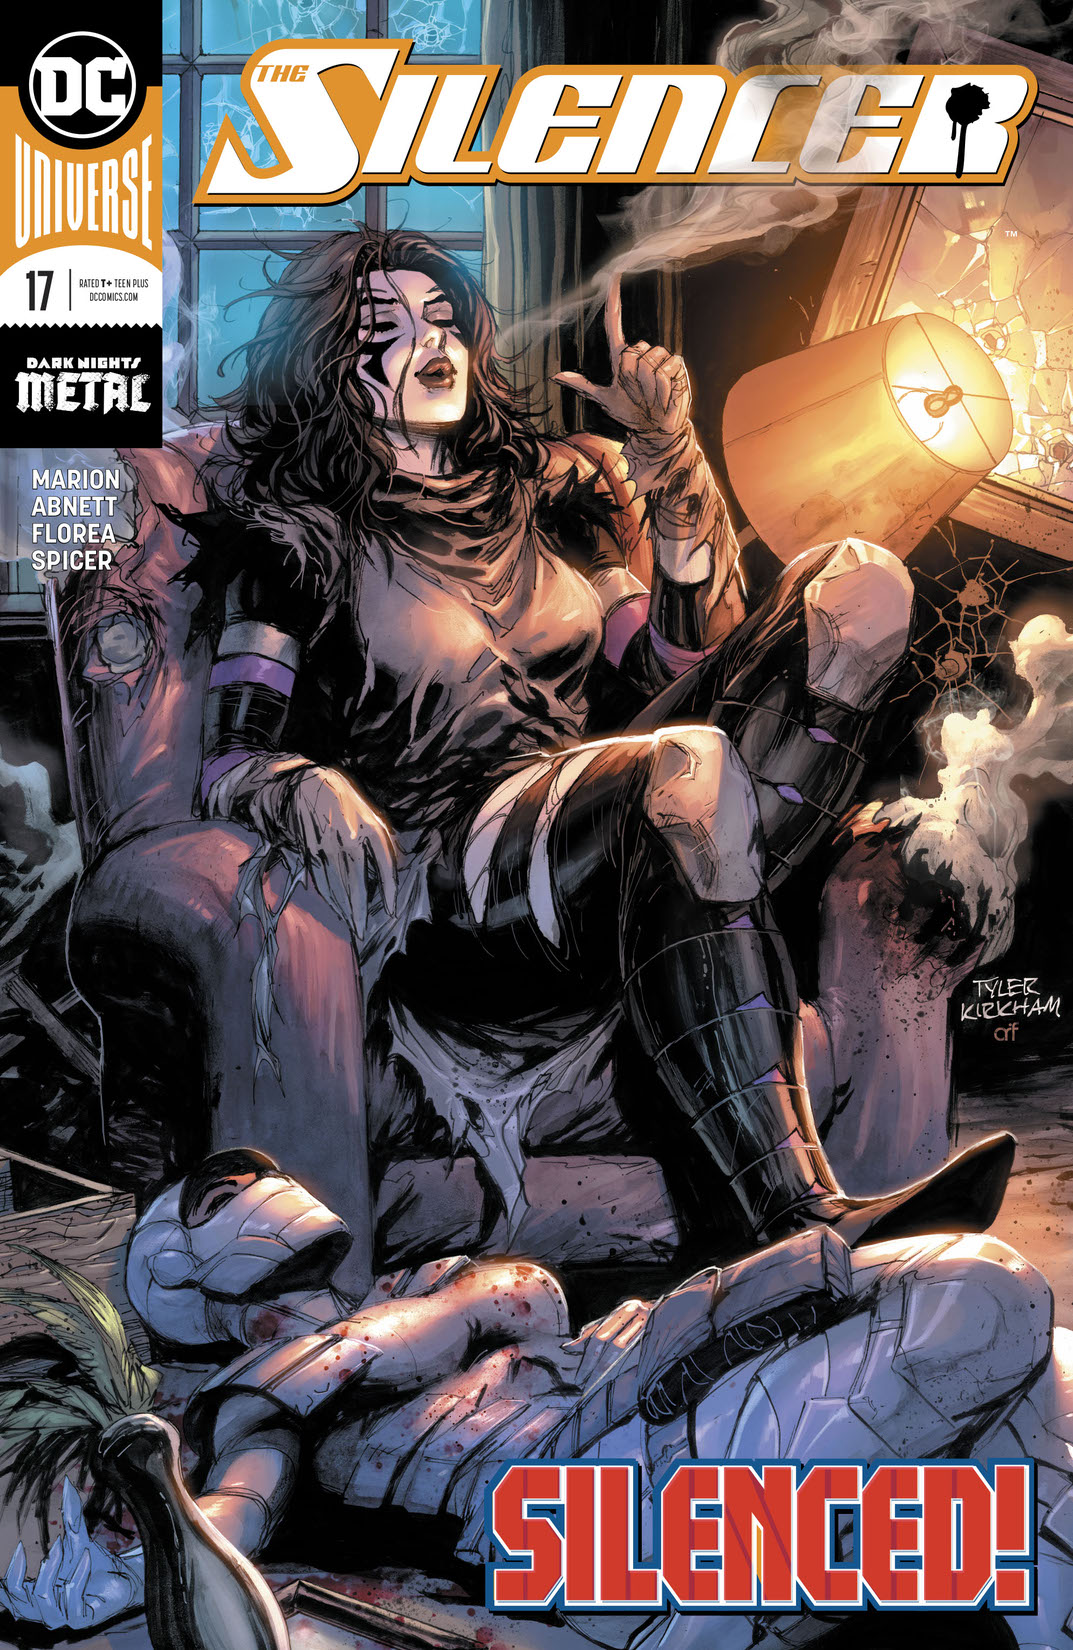 The Silencer #17 preview images